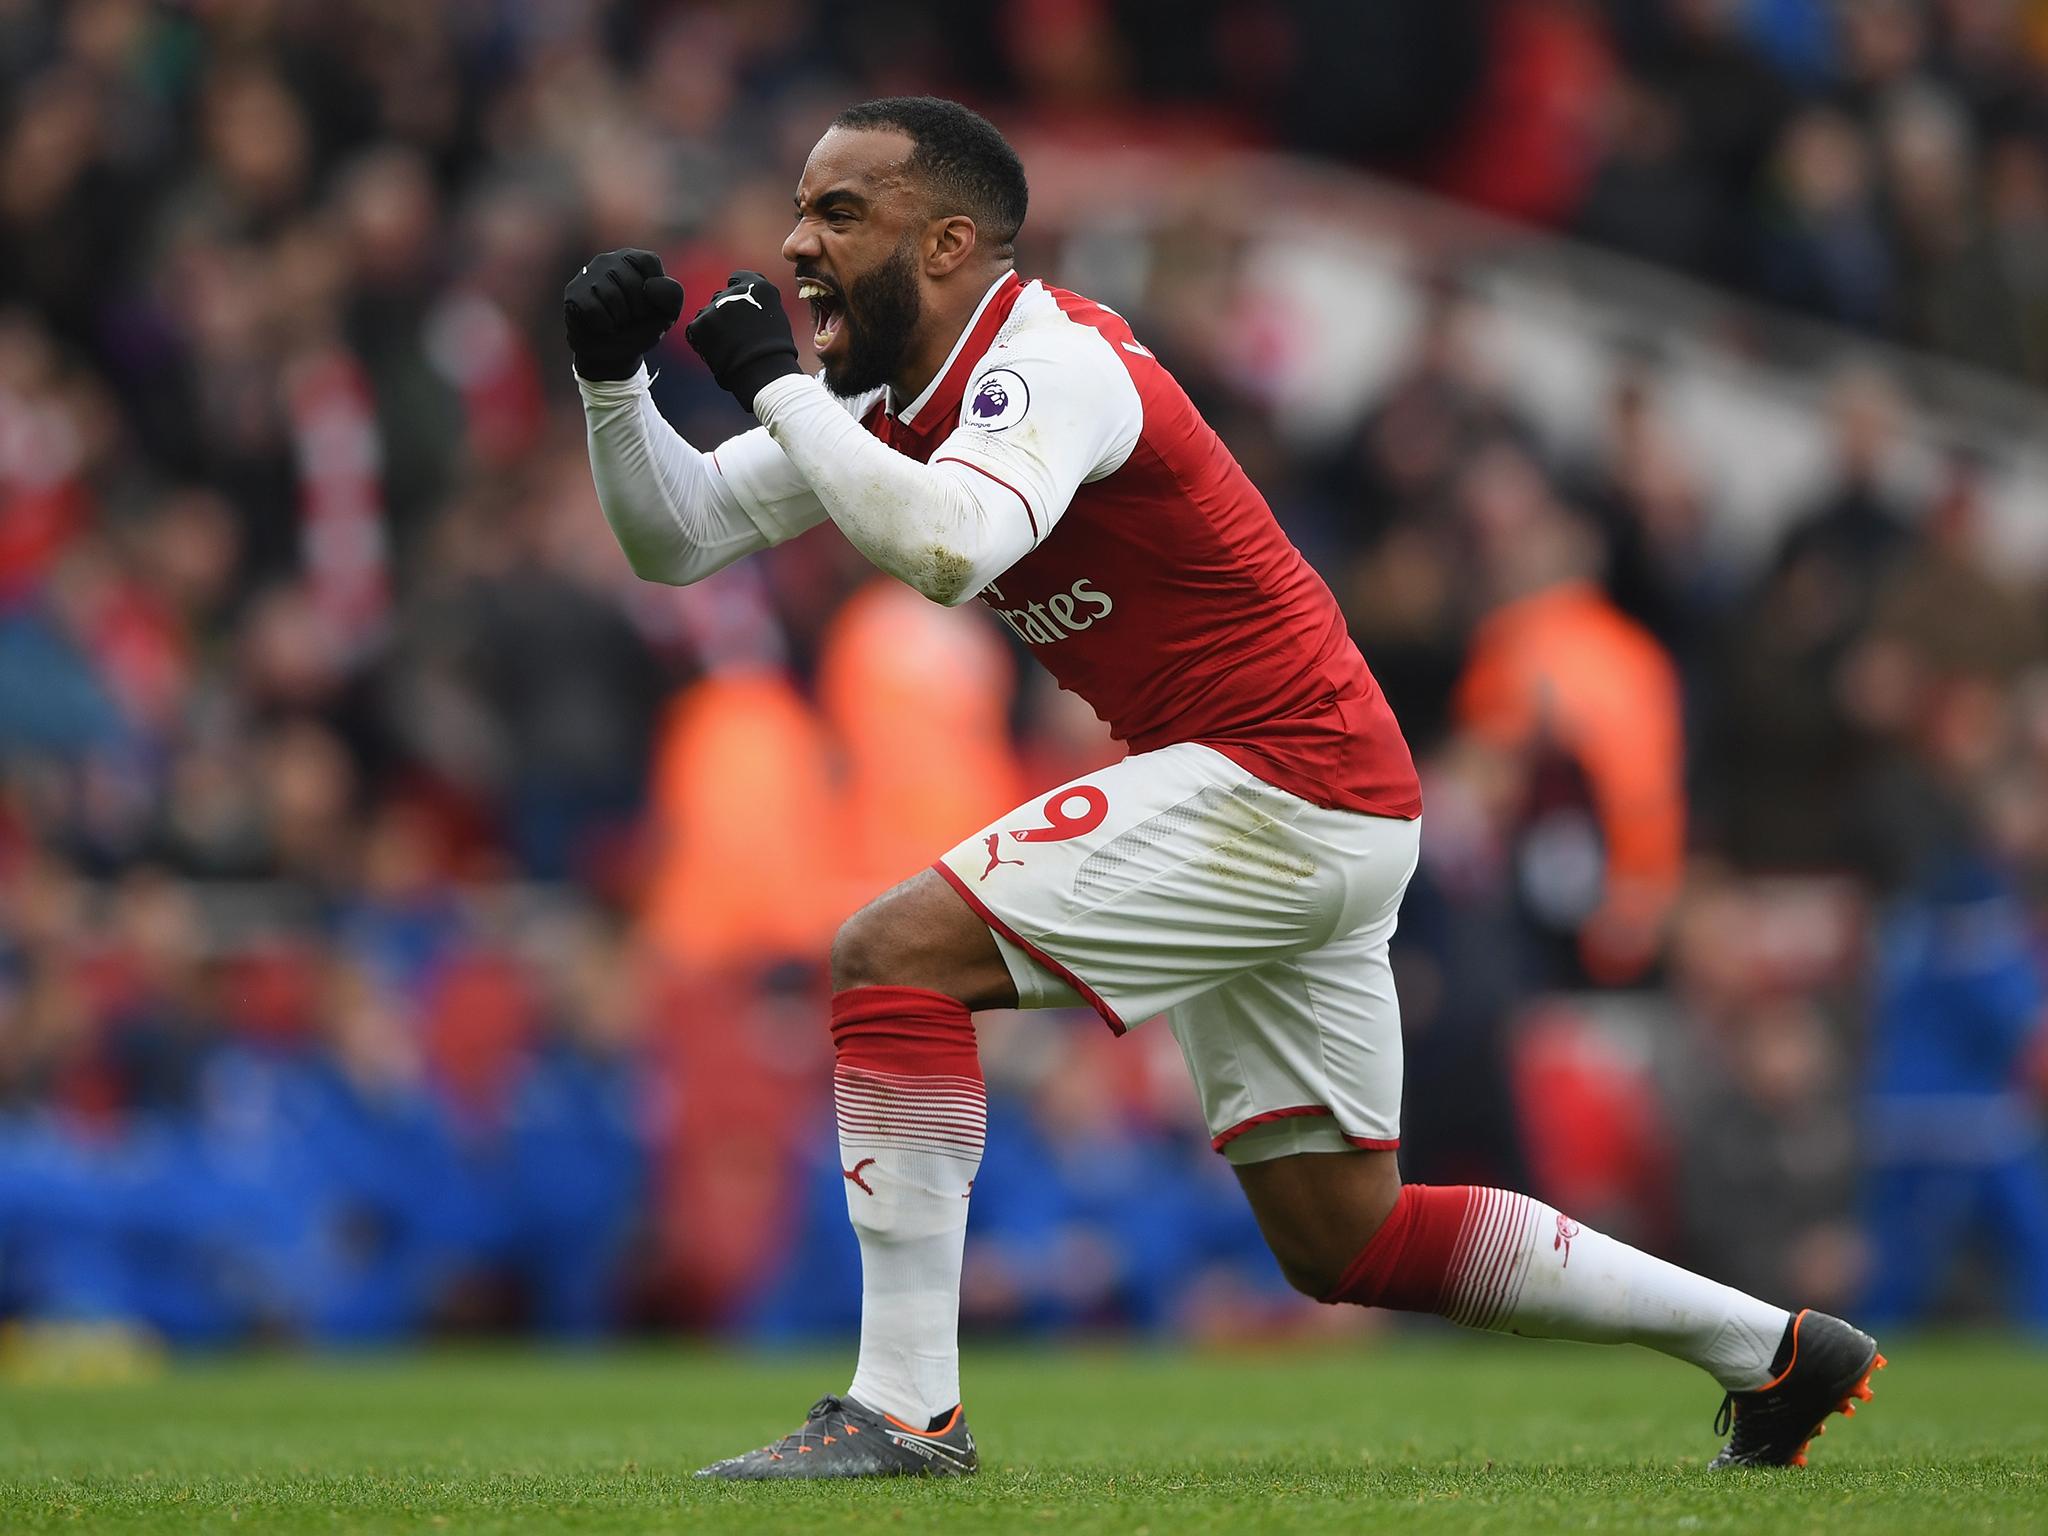 Alexandre Lacazette has been backed by Arsene Wenger to find his best form